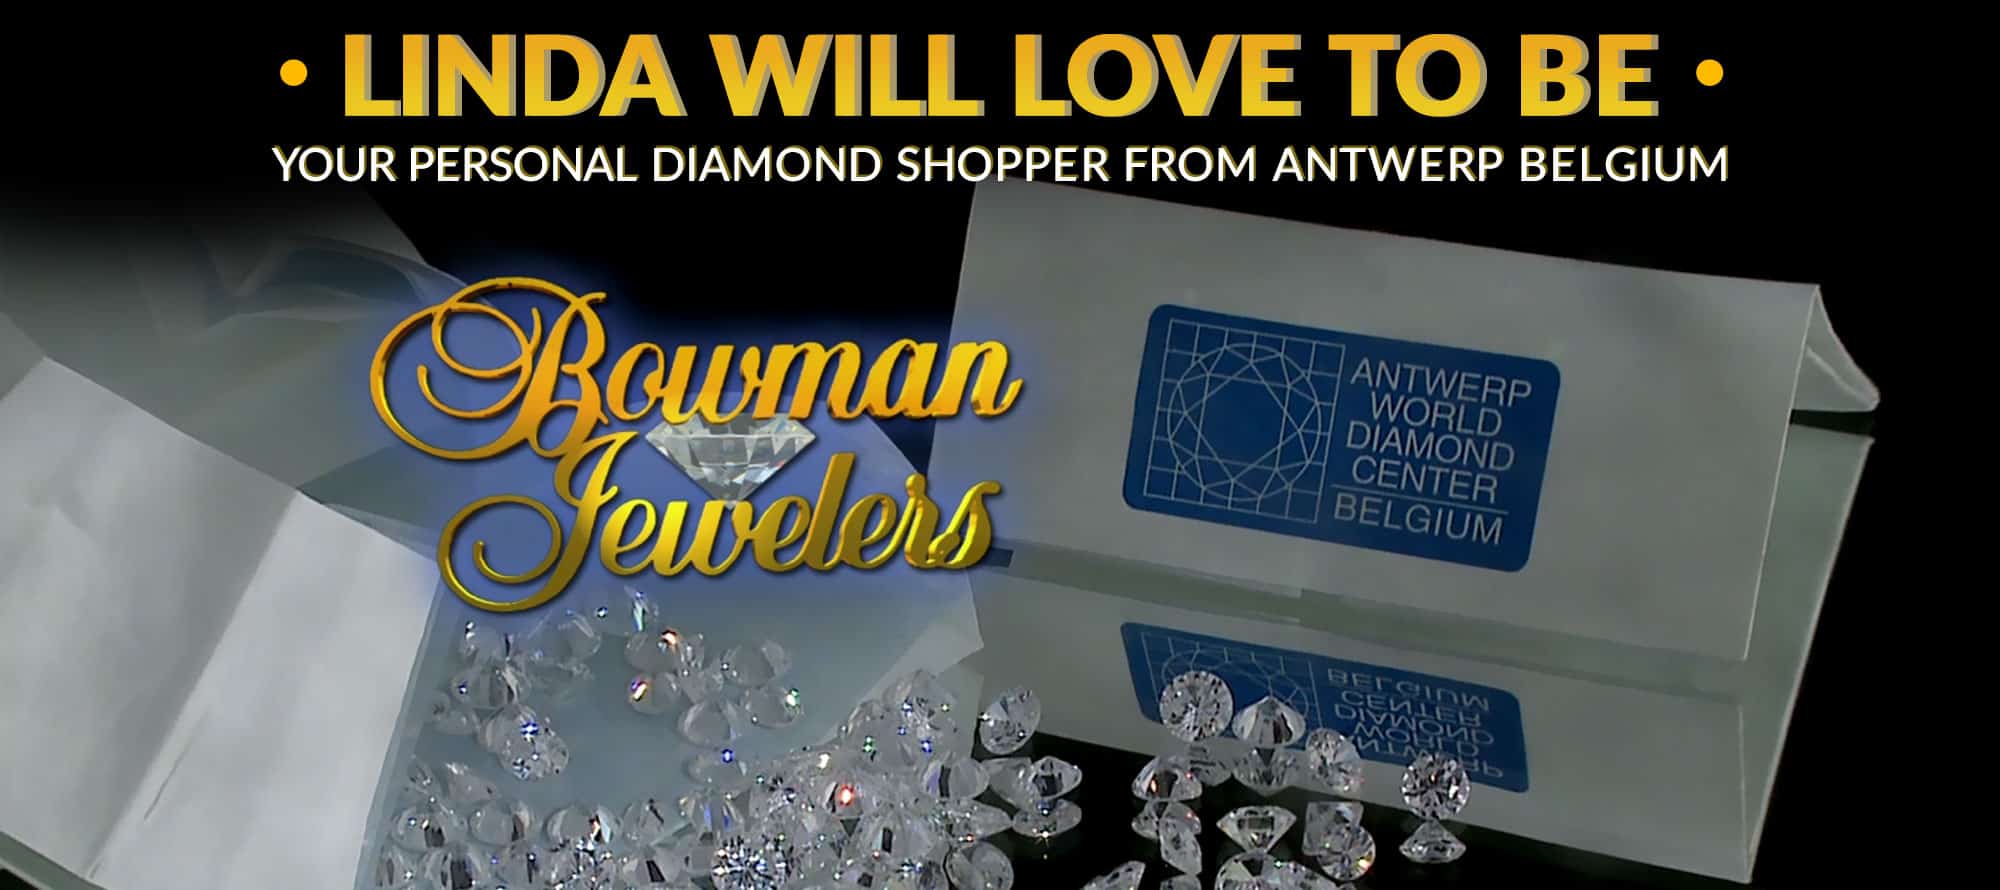 Find Your Perfect Diamond From Antwrap at Bowman Jewelers